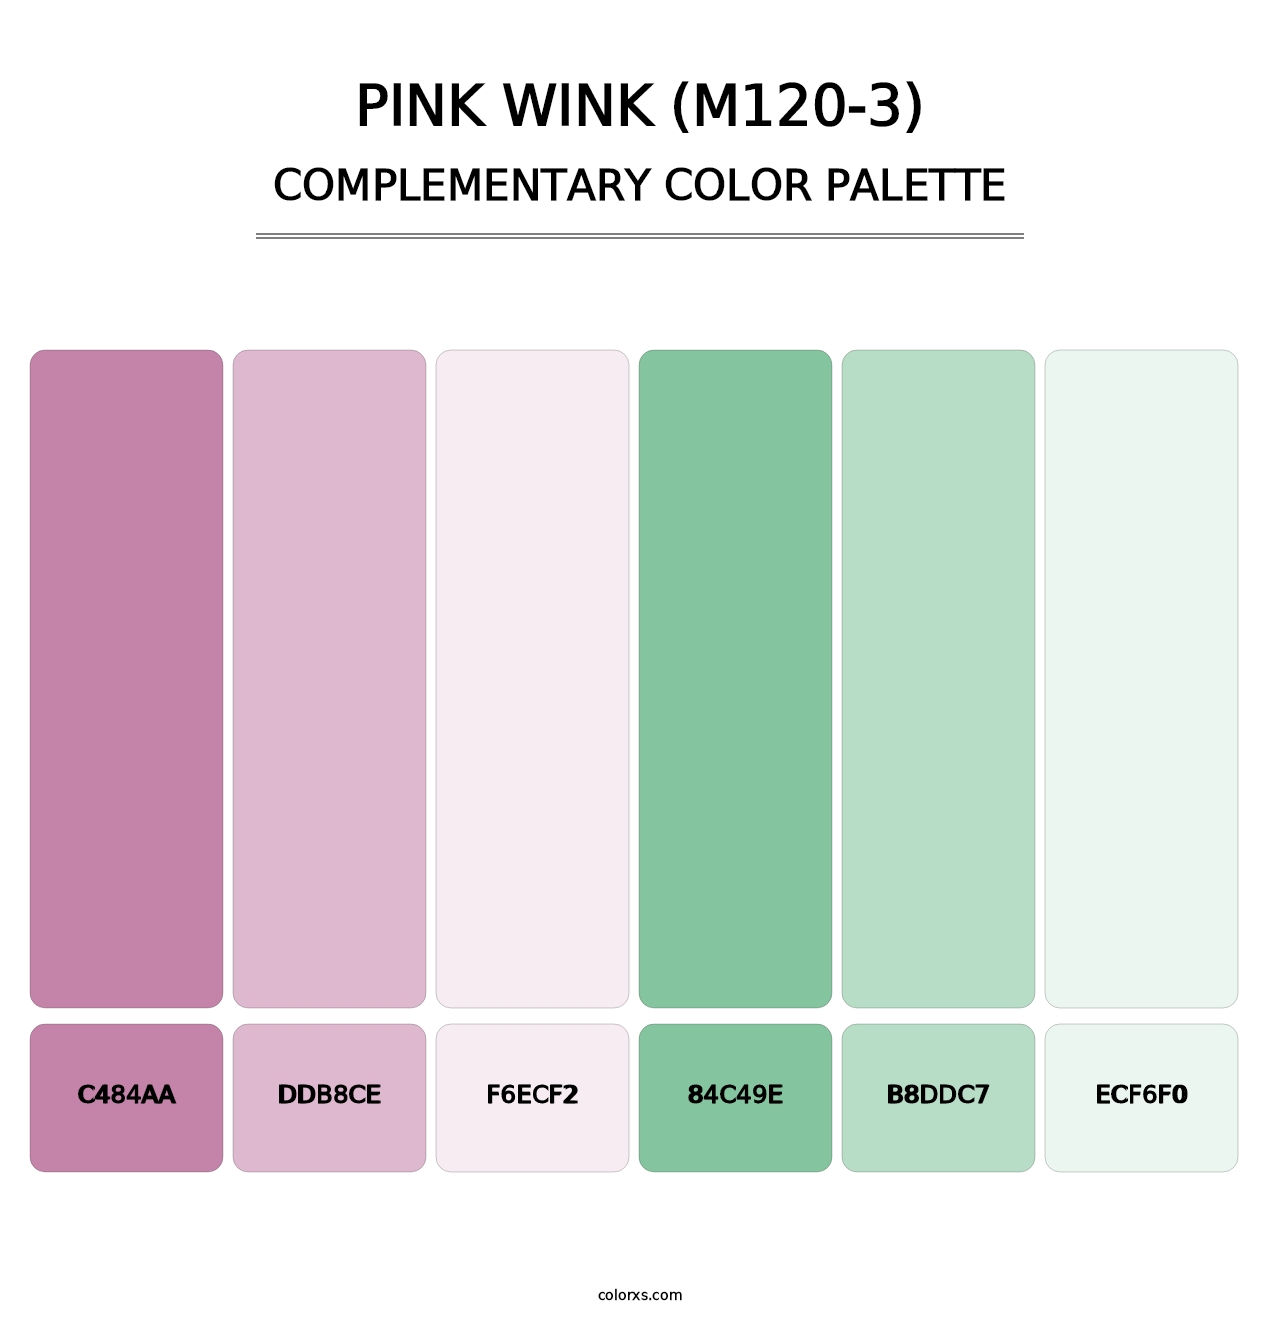 Pink Wink (M120-3) - Complementary Color Palette